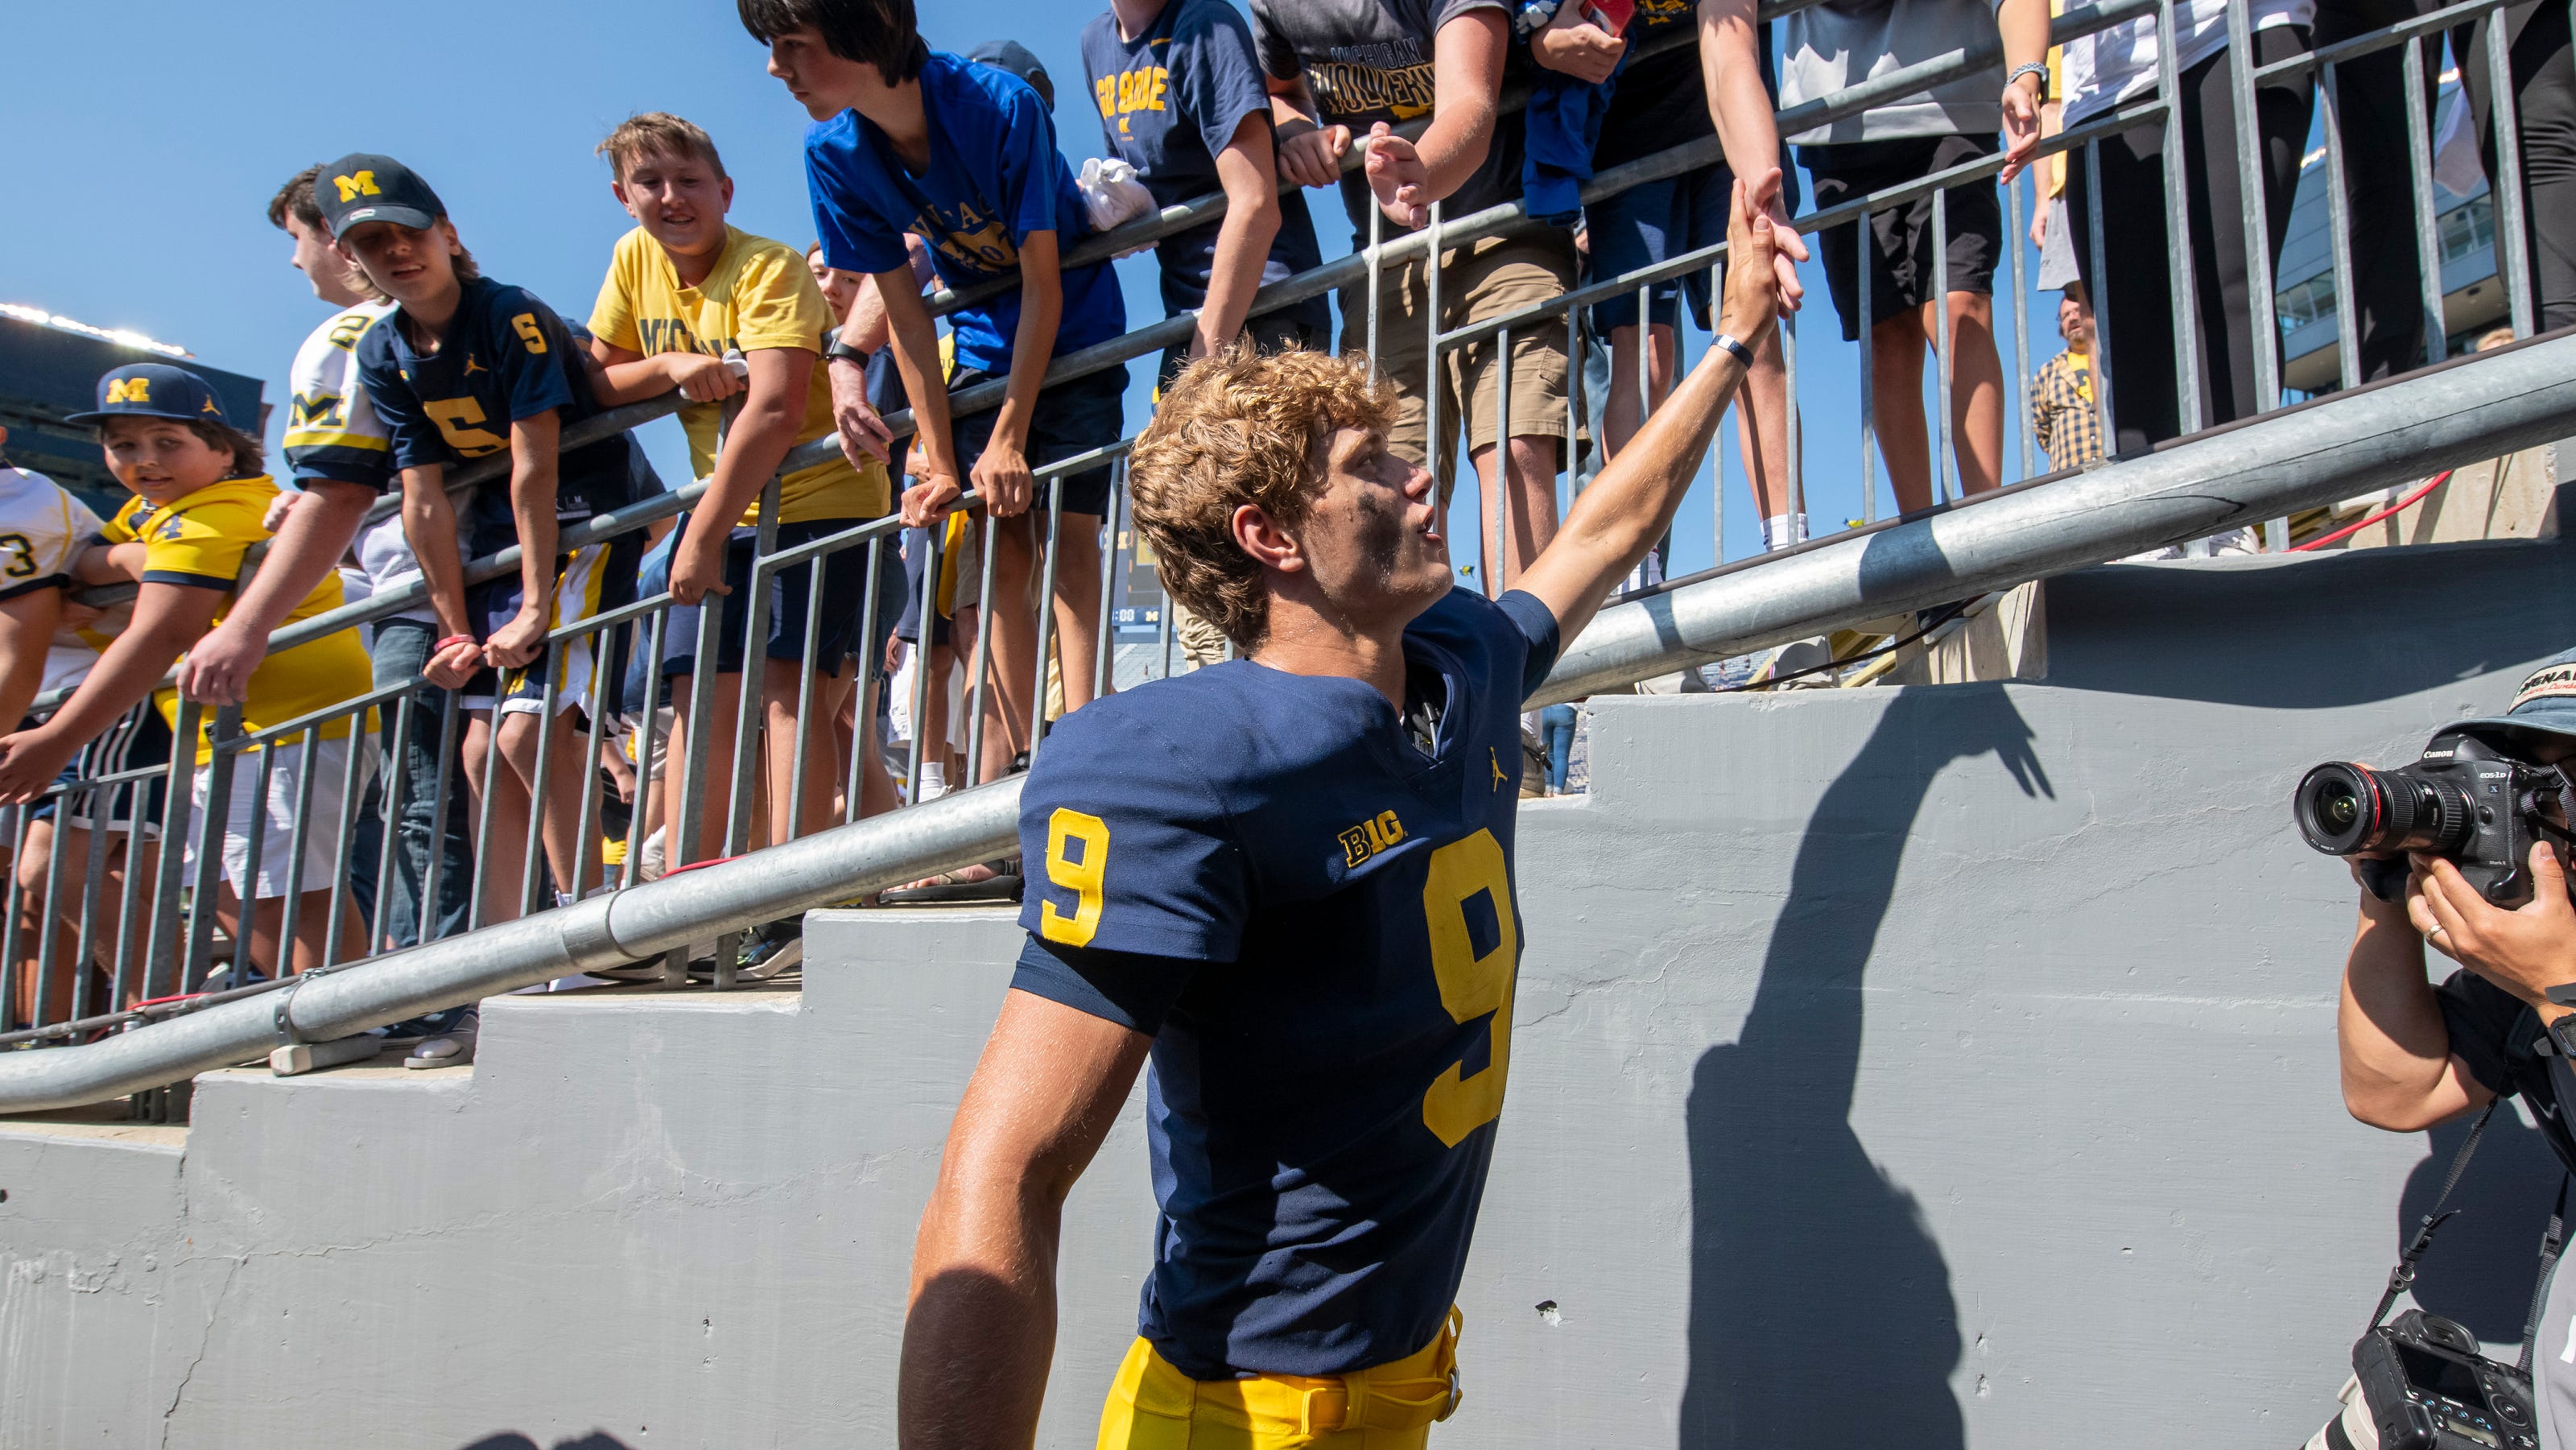  Michigan QB J.J. McCarthy looks to spread around smiles with foundation's launch 